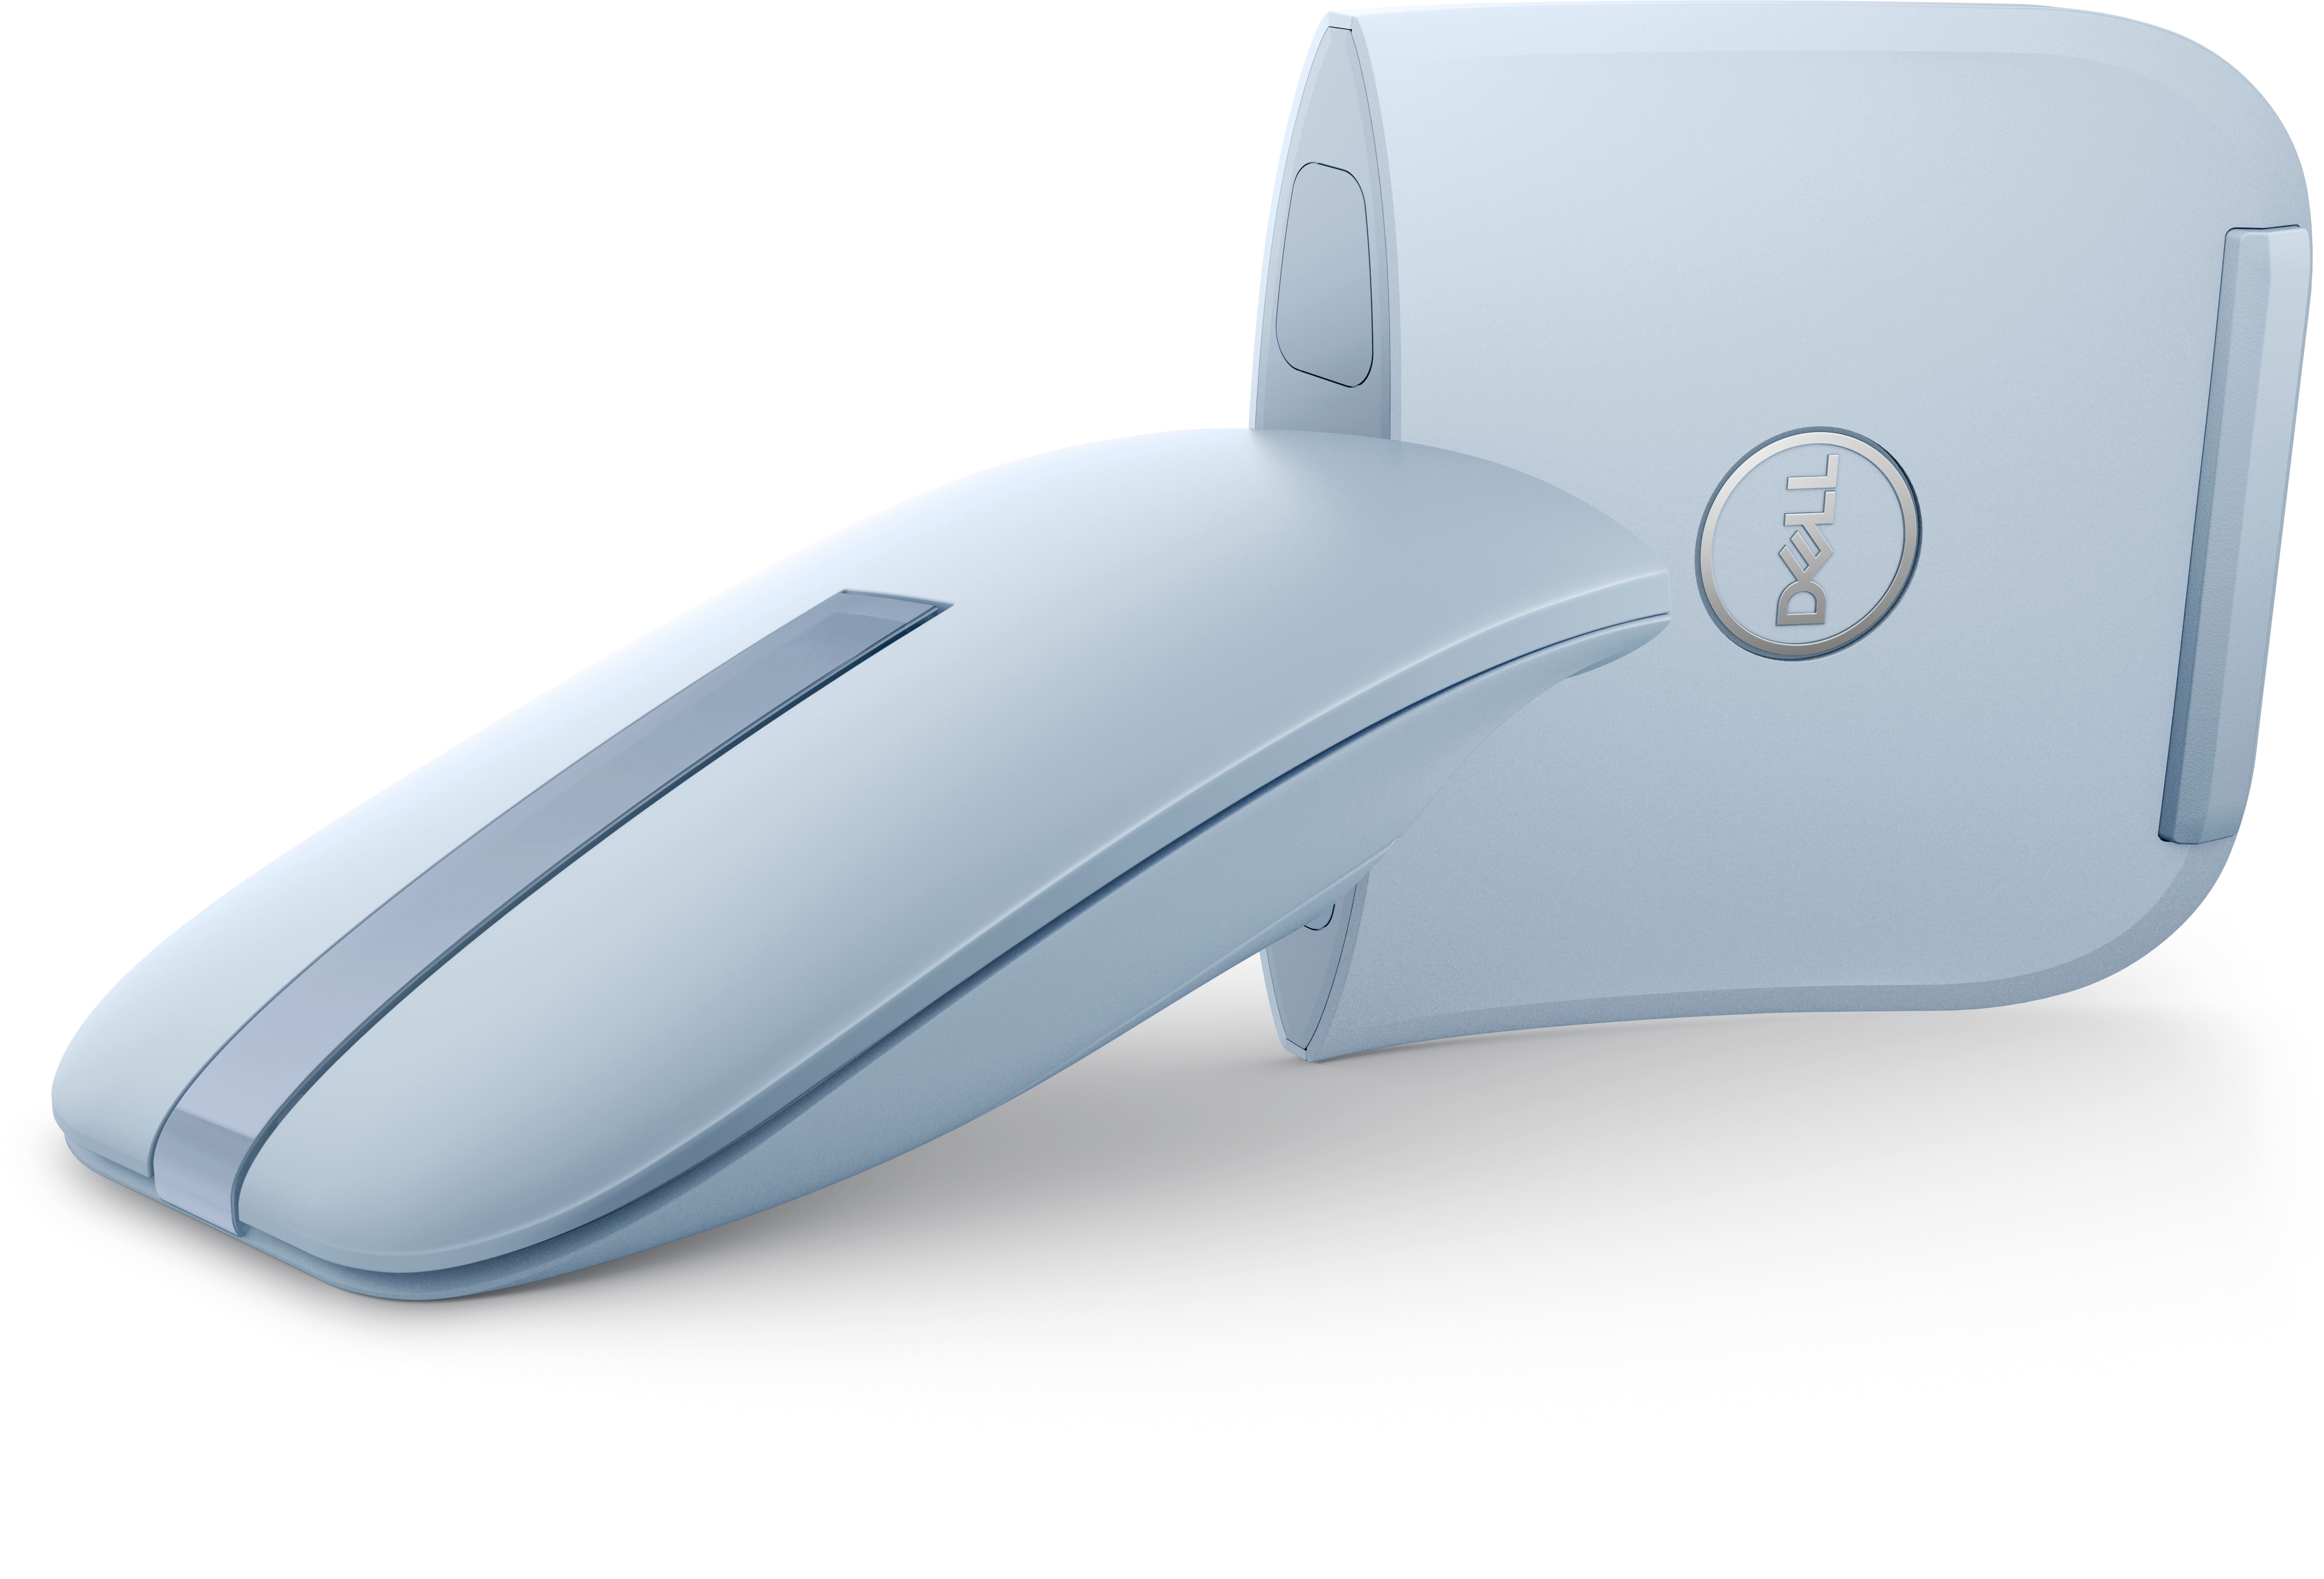 MS700 Bluetooth Travel Mouse